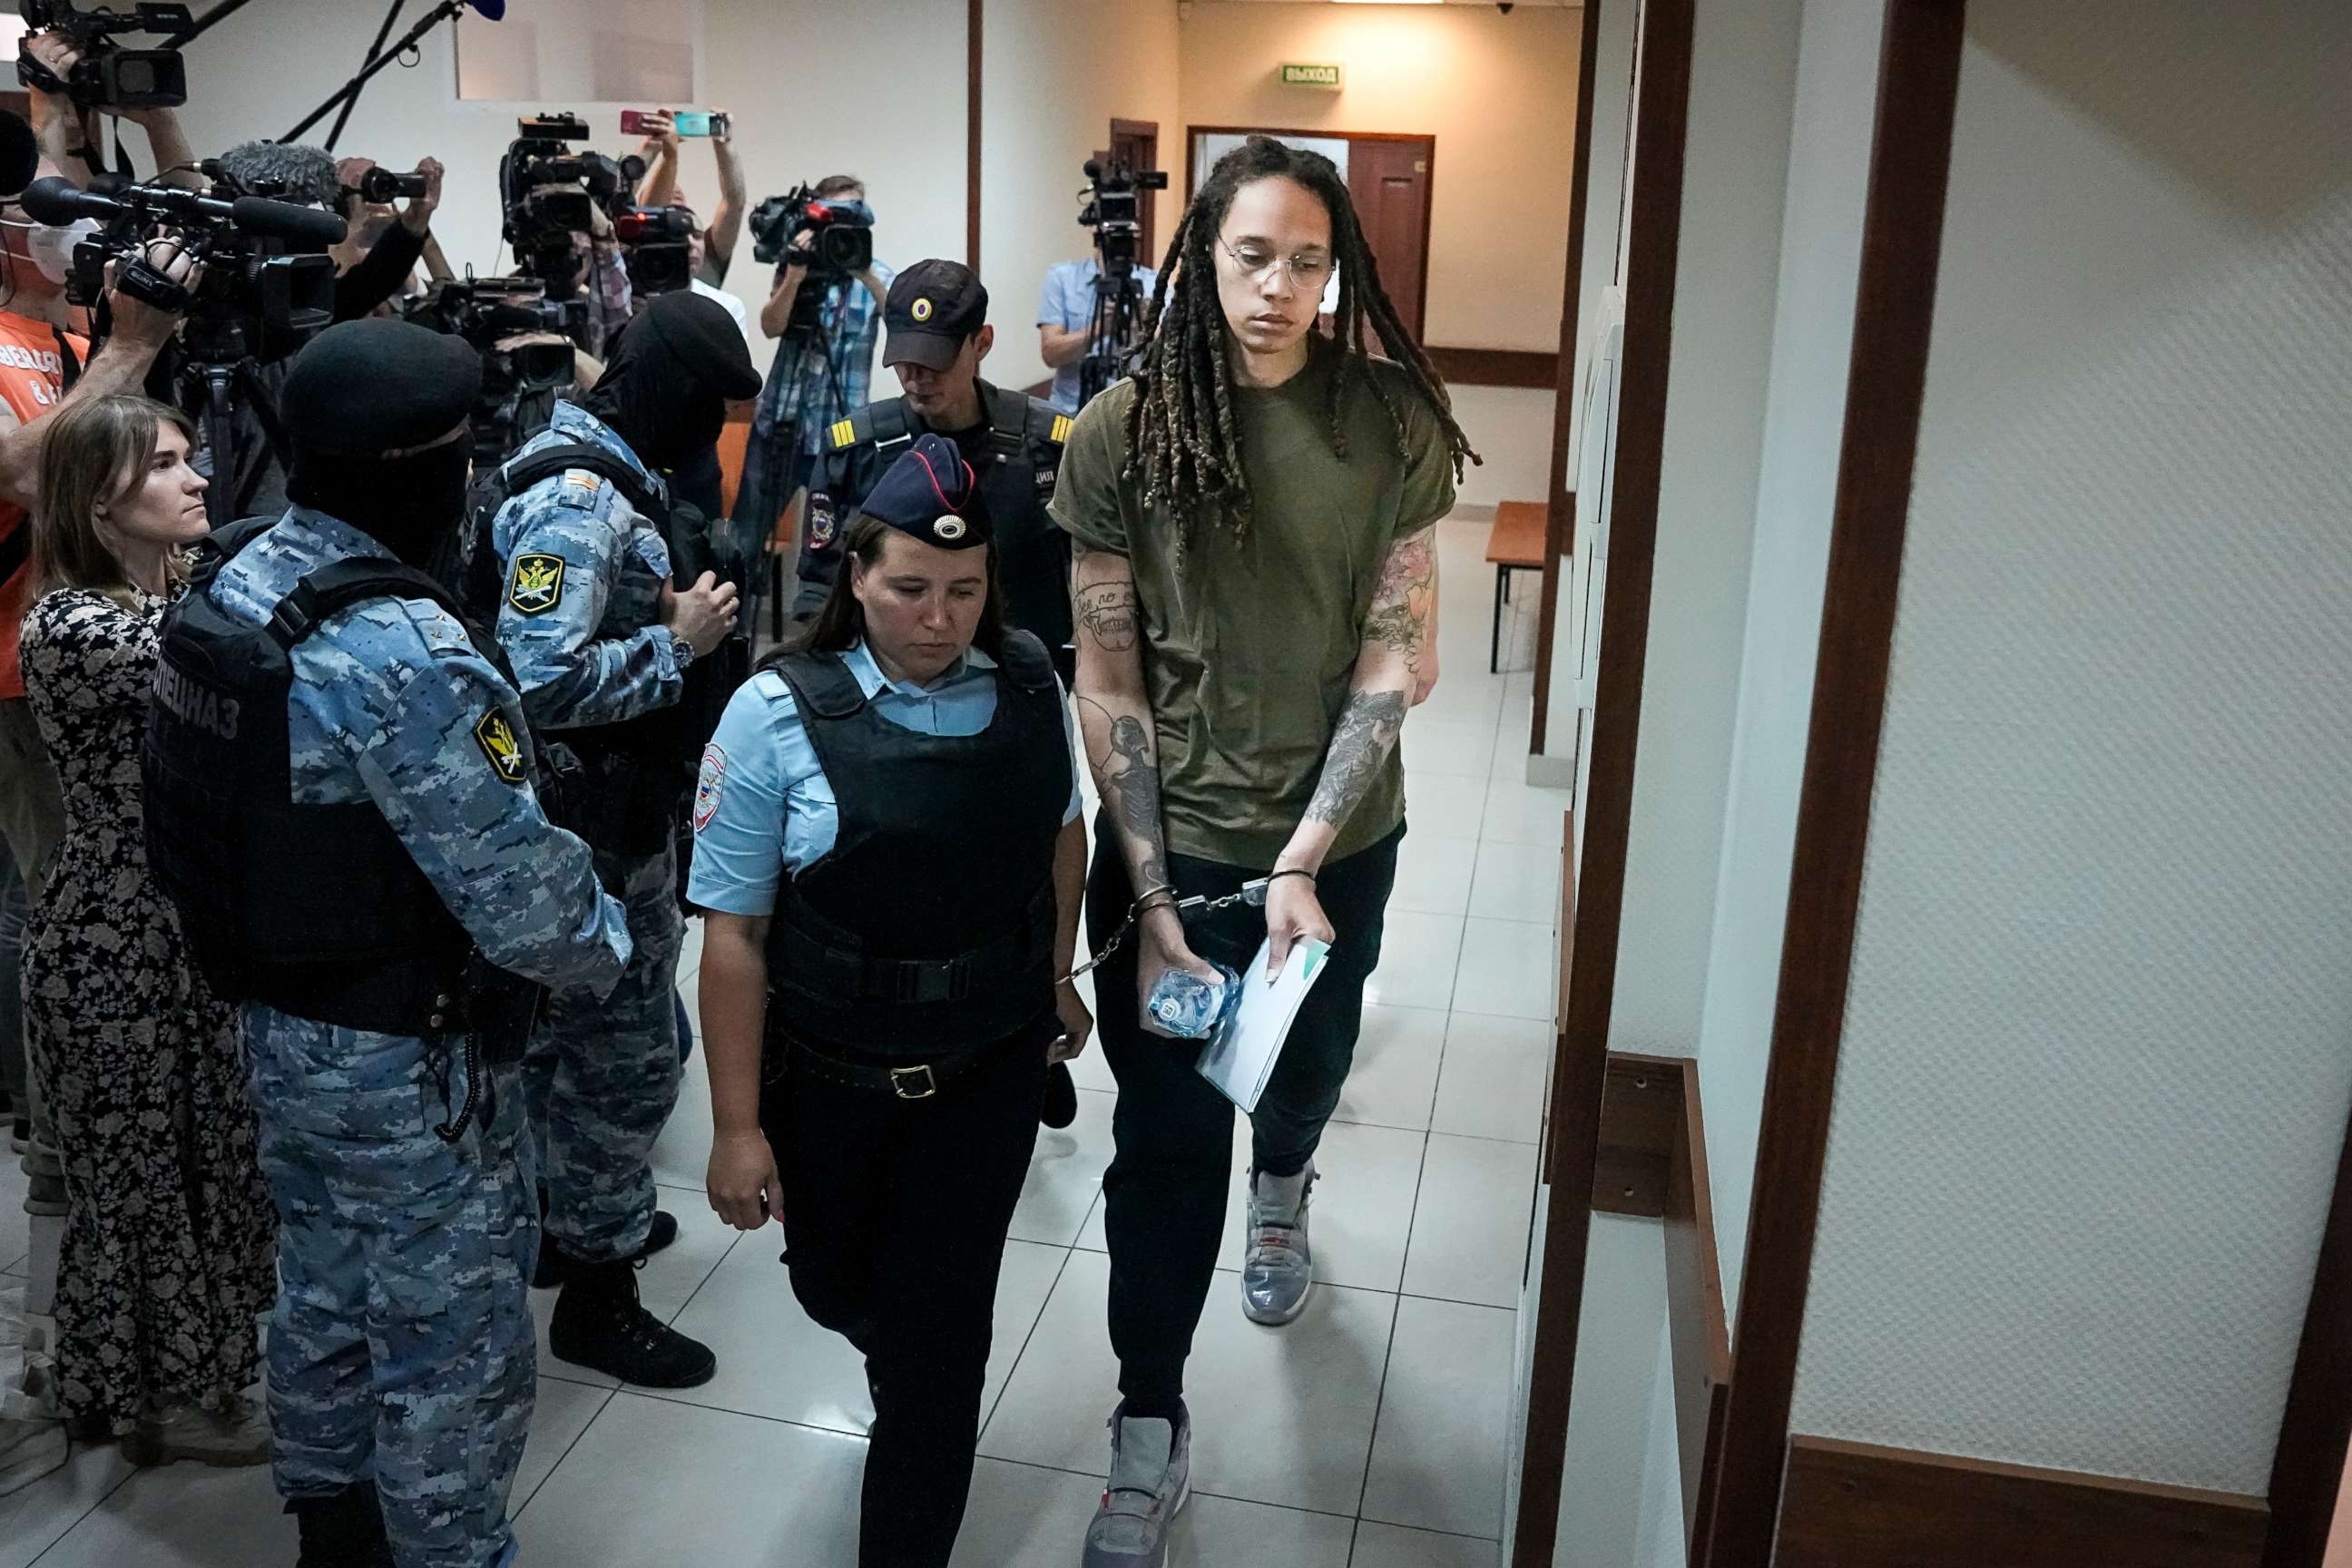 PHOTO: WNBA star and two-time Olympic gold medalist Brittney Griner is escorted in a court room prior to a hearing, in Khimki, just outside Moscow, Russia, on Aug. 2, 2022.